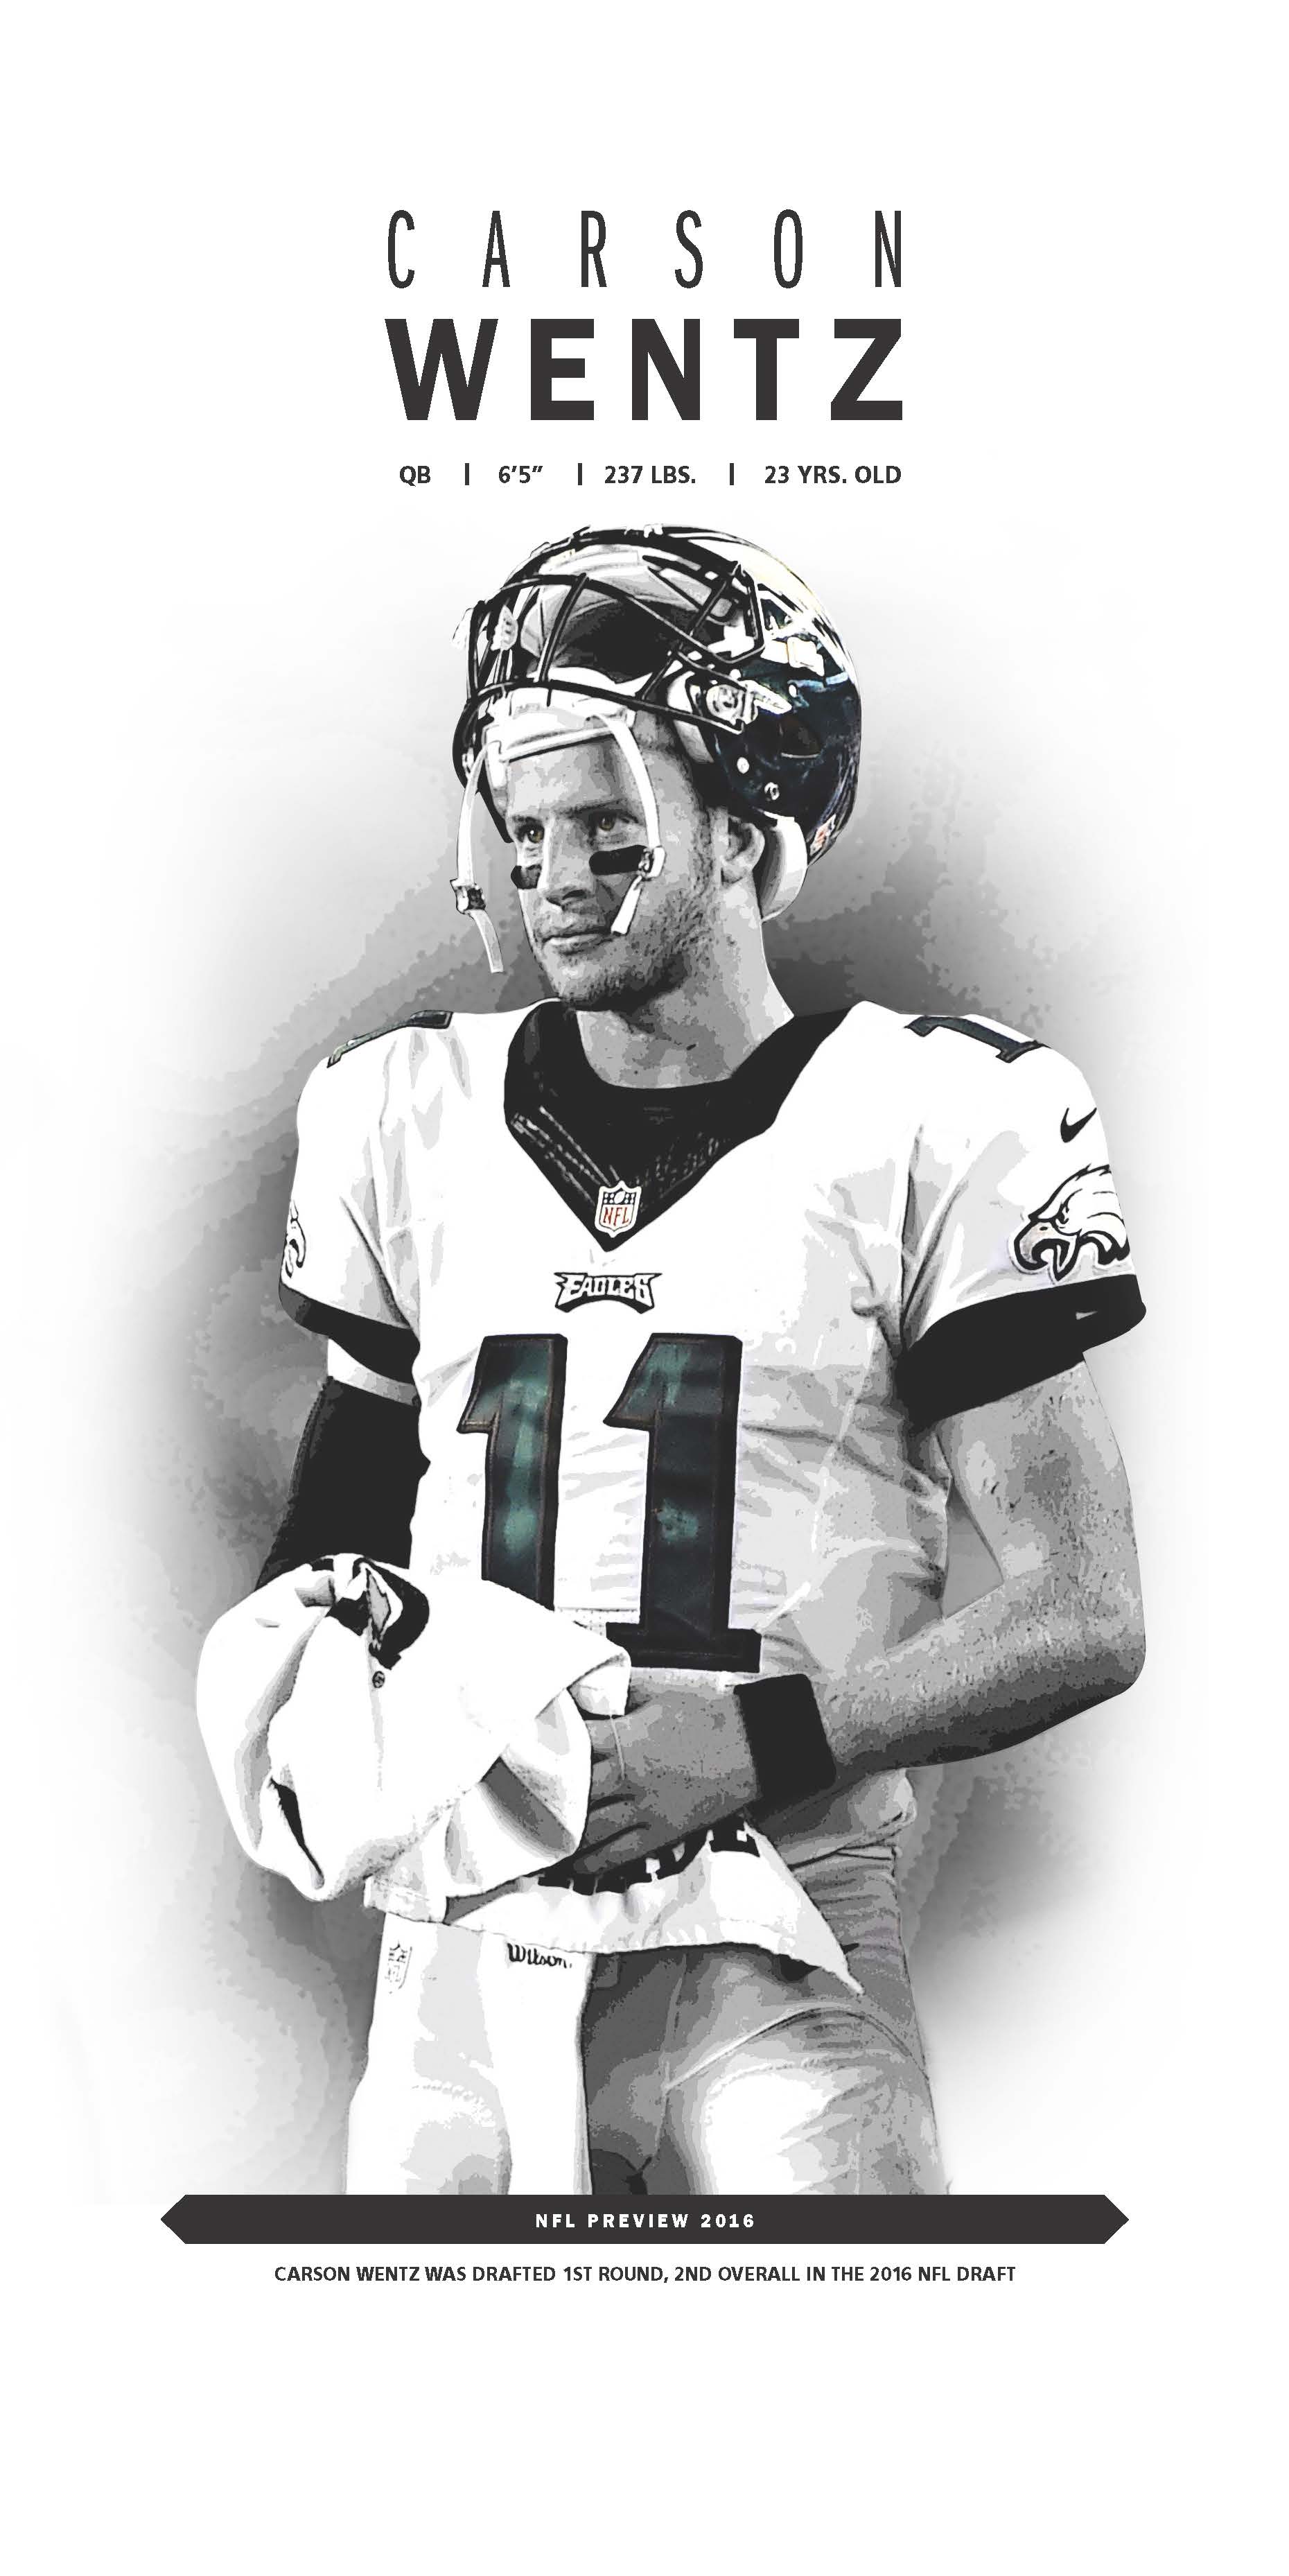 Carson Wentz cover for the Courier Post.. Pinteres